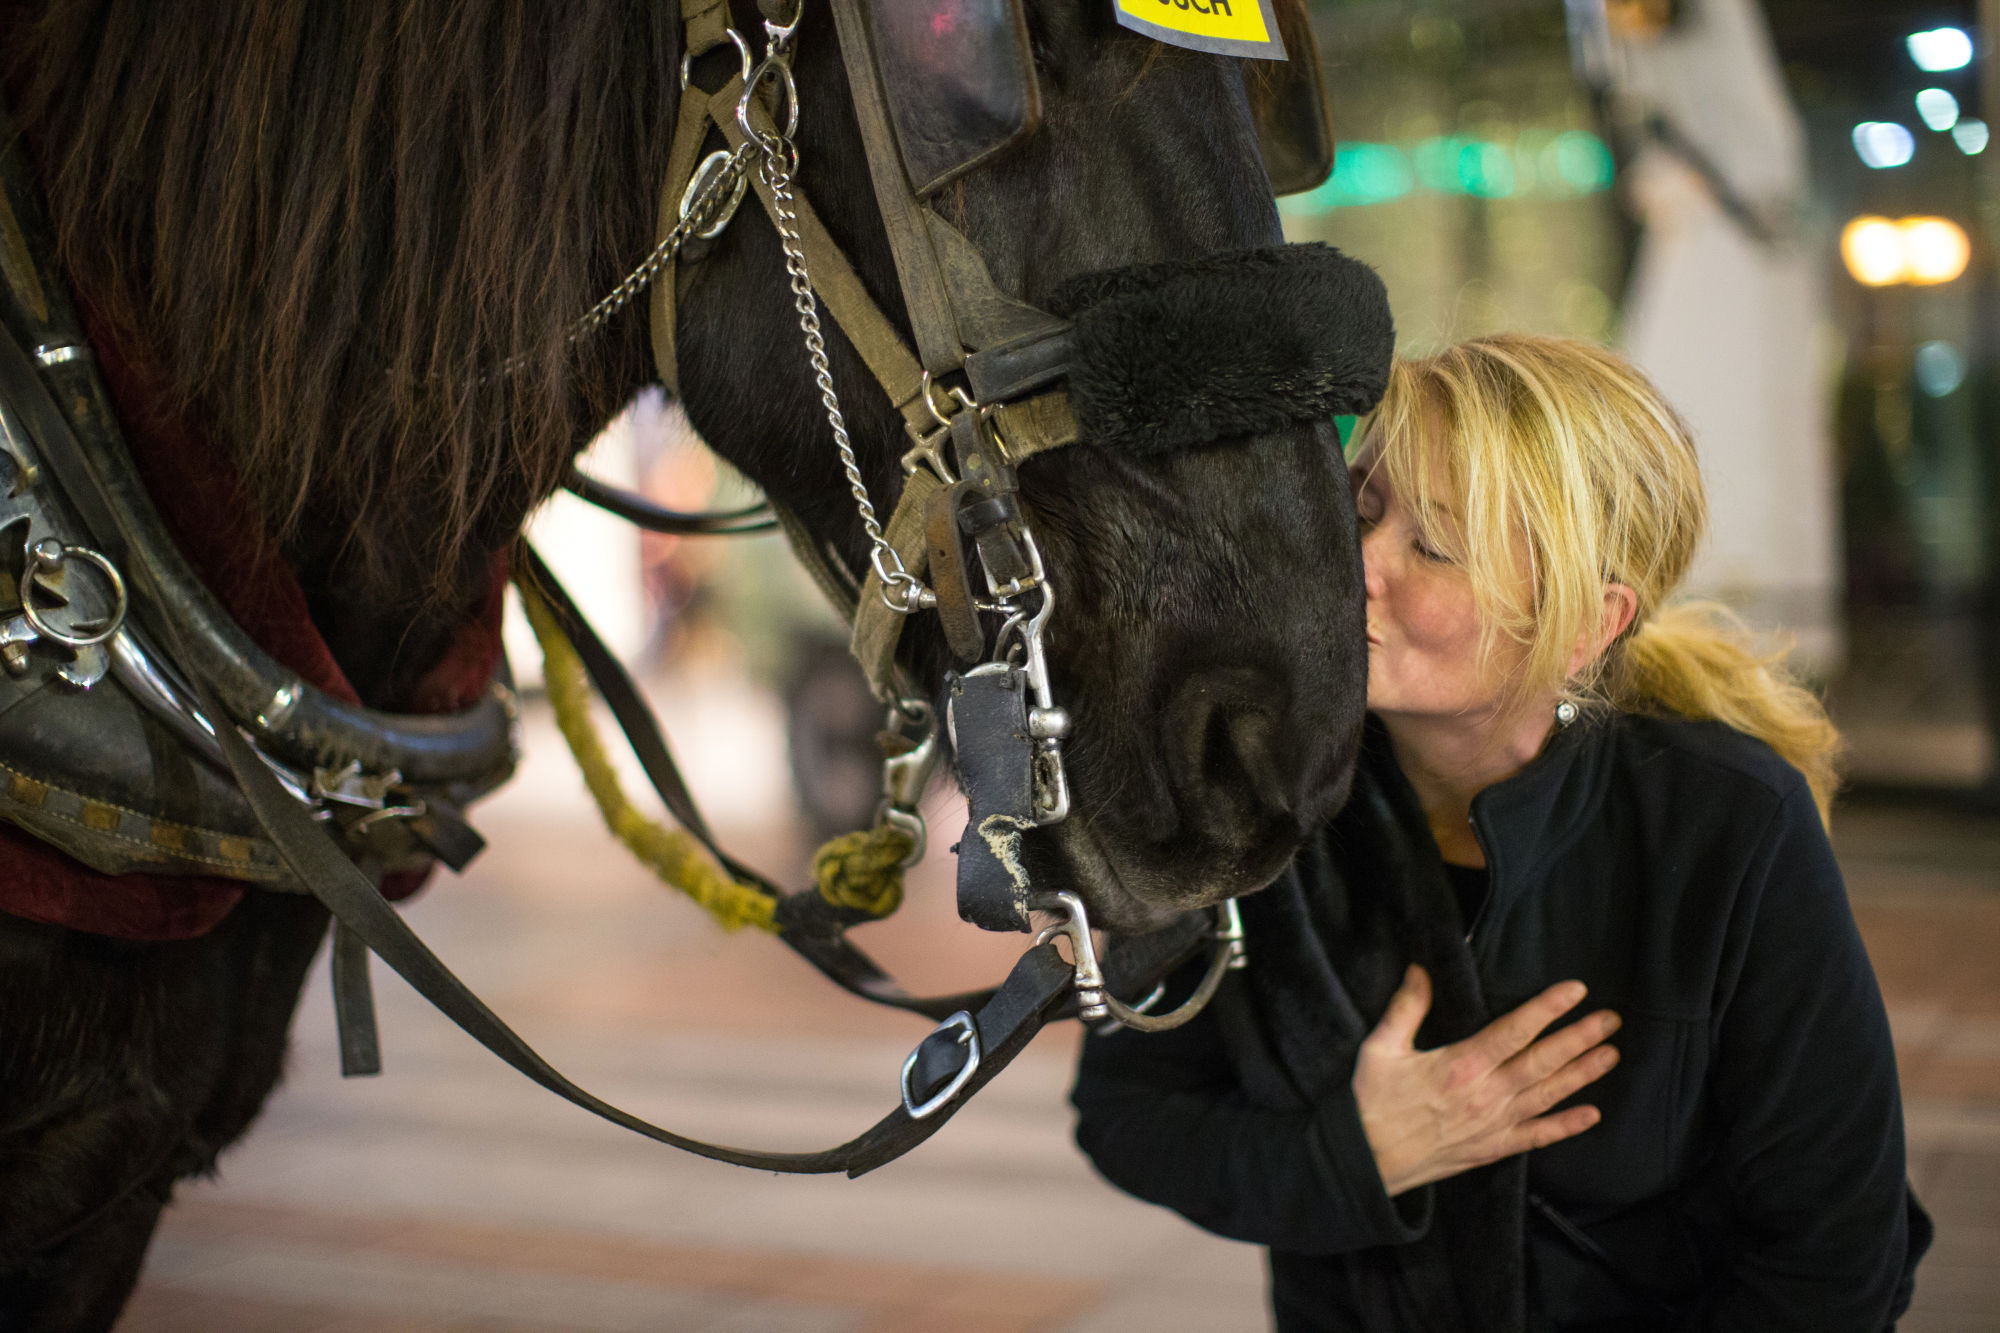 Tanya Therrien of White Rock, British Columbia gives Amos a kiss outside Westlake Center in Seattle. “I’m so in love with him,” Therrien says. ”I want to take him home.” © Karen Ducey for Crosscut